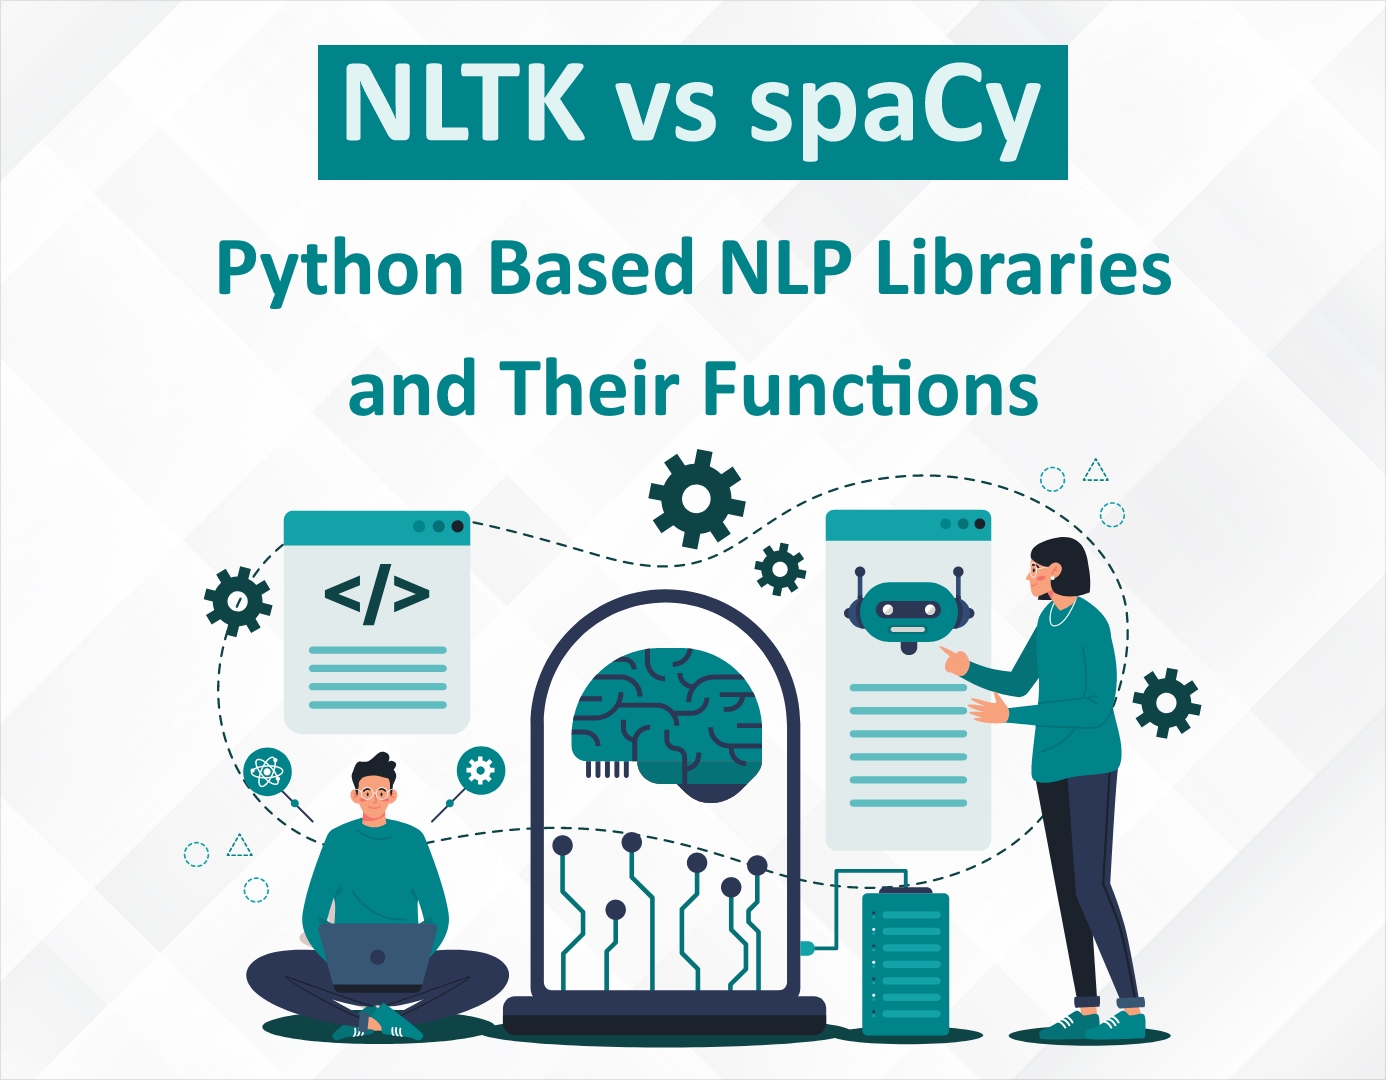 NLTK vs spaCy - Python based NLP libraries and their functions